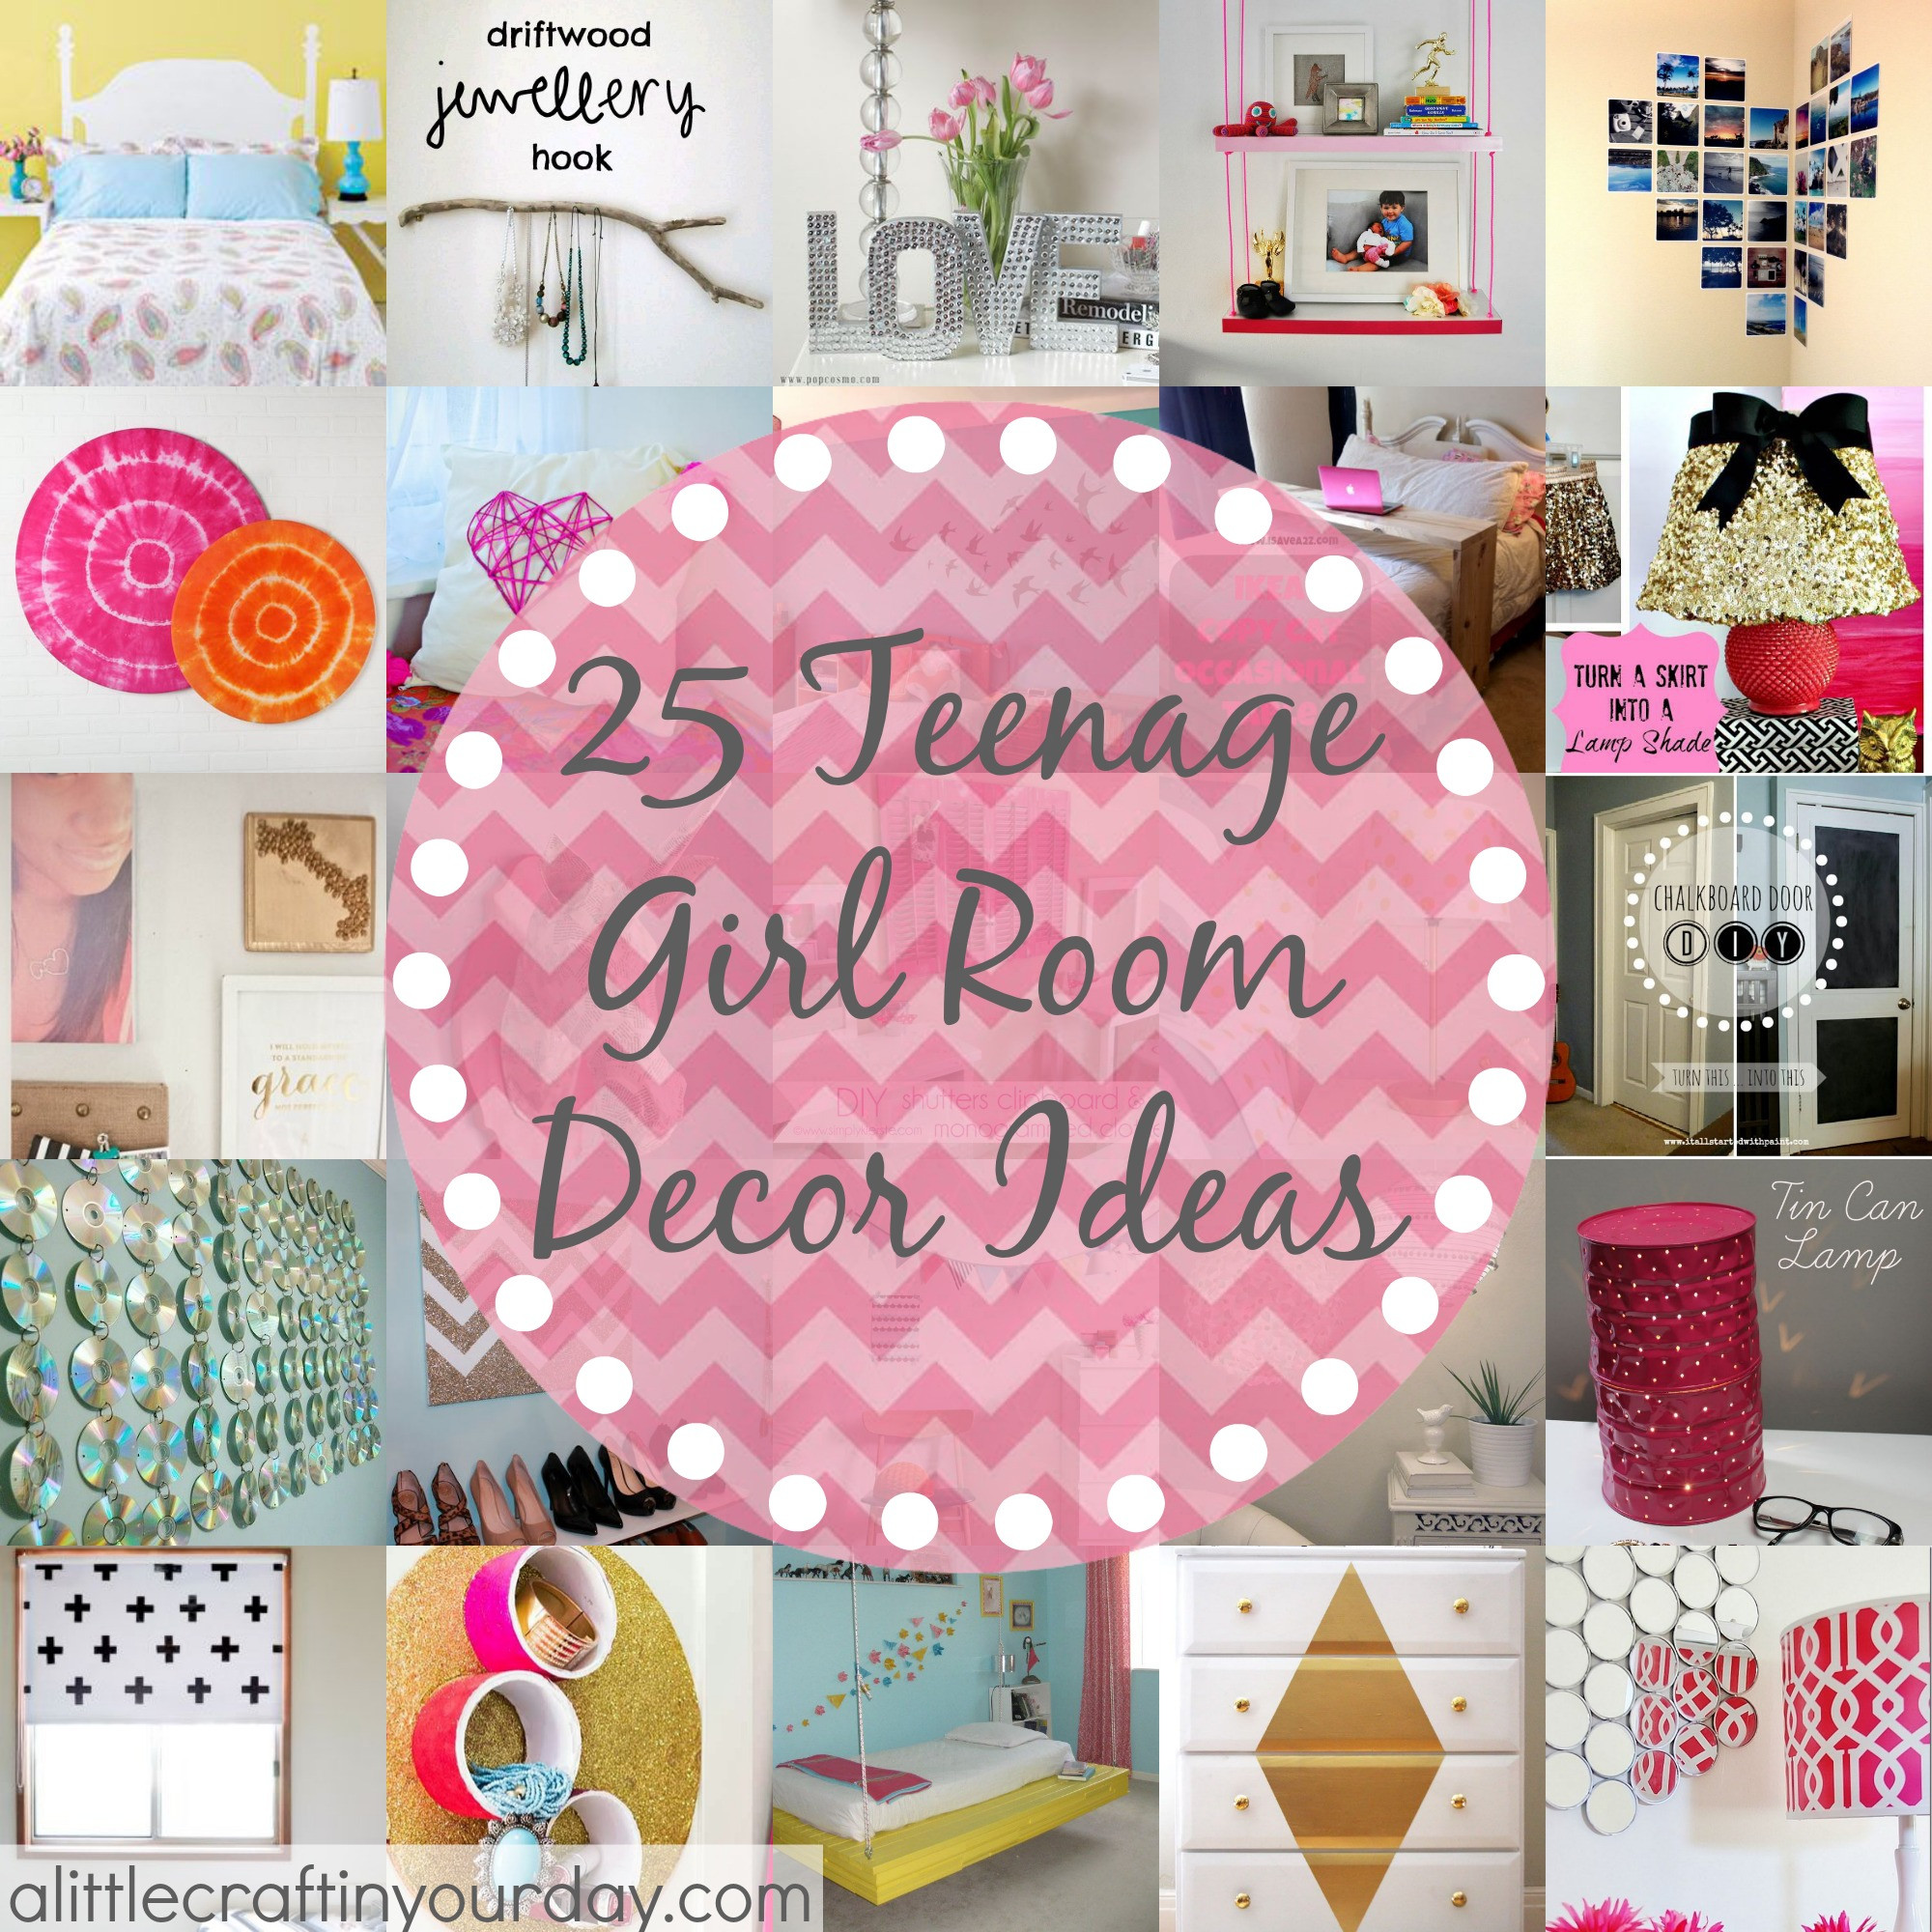 DIY Room Decorations For Teenage Girls
 25 More Teenage Girl Room Decor Ideas A Little Craft In